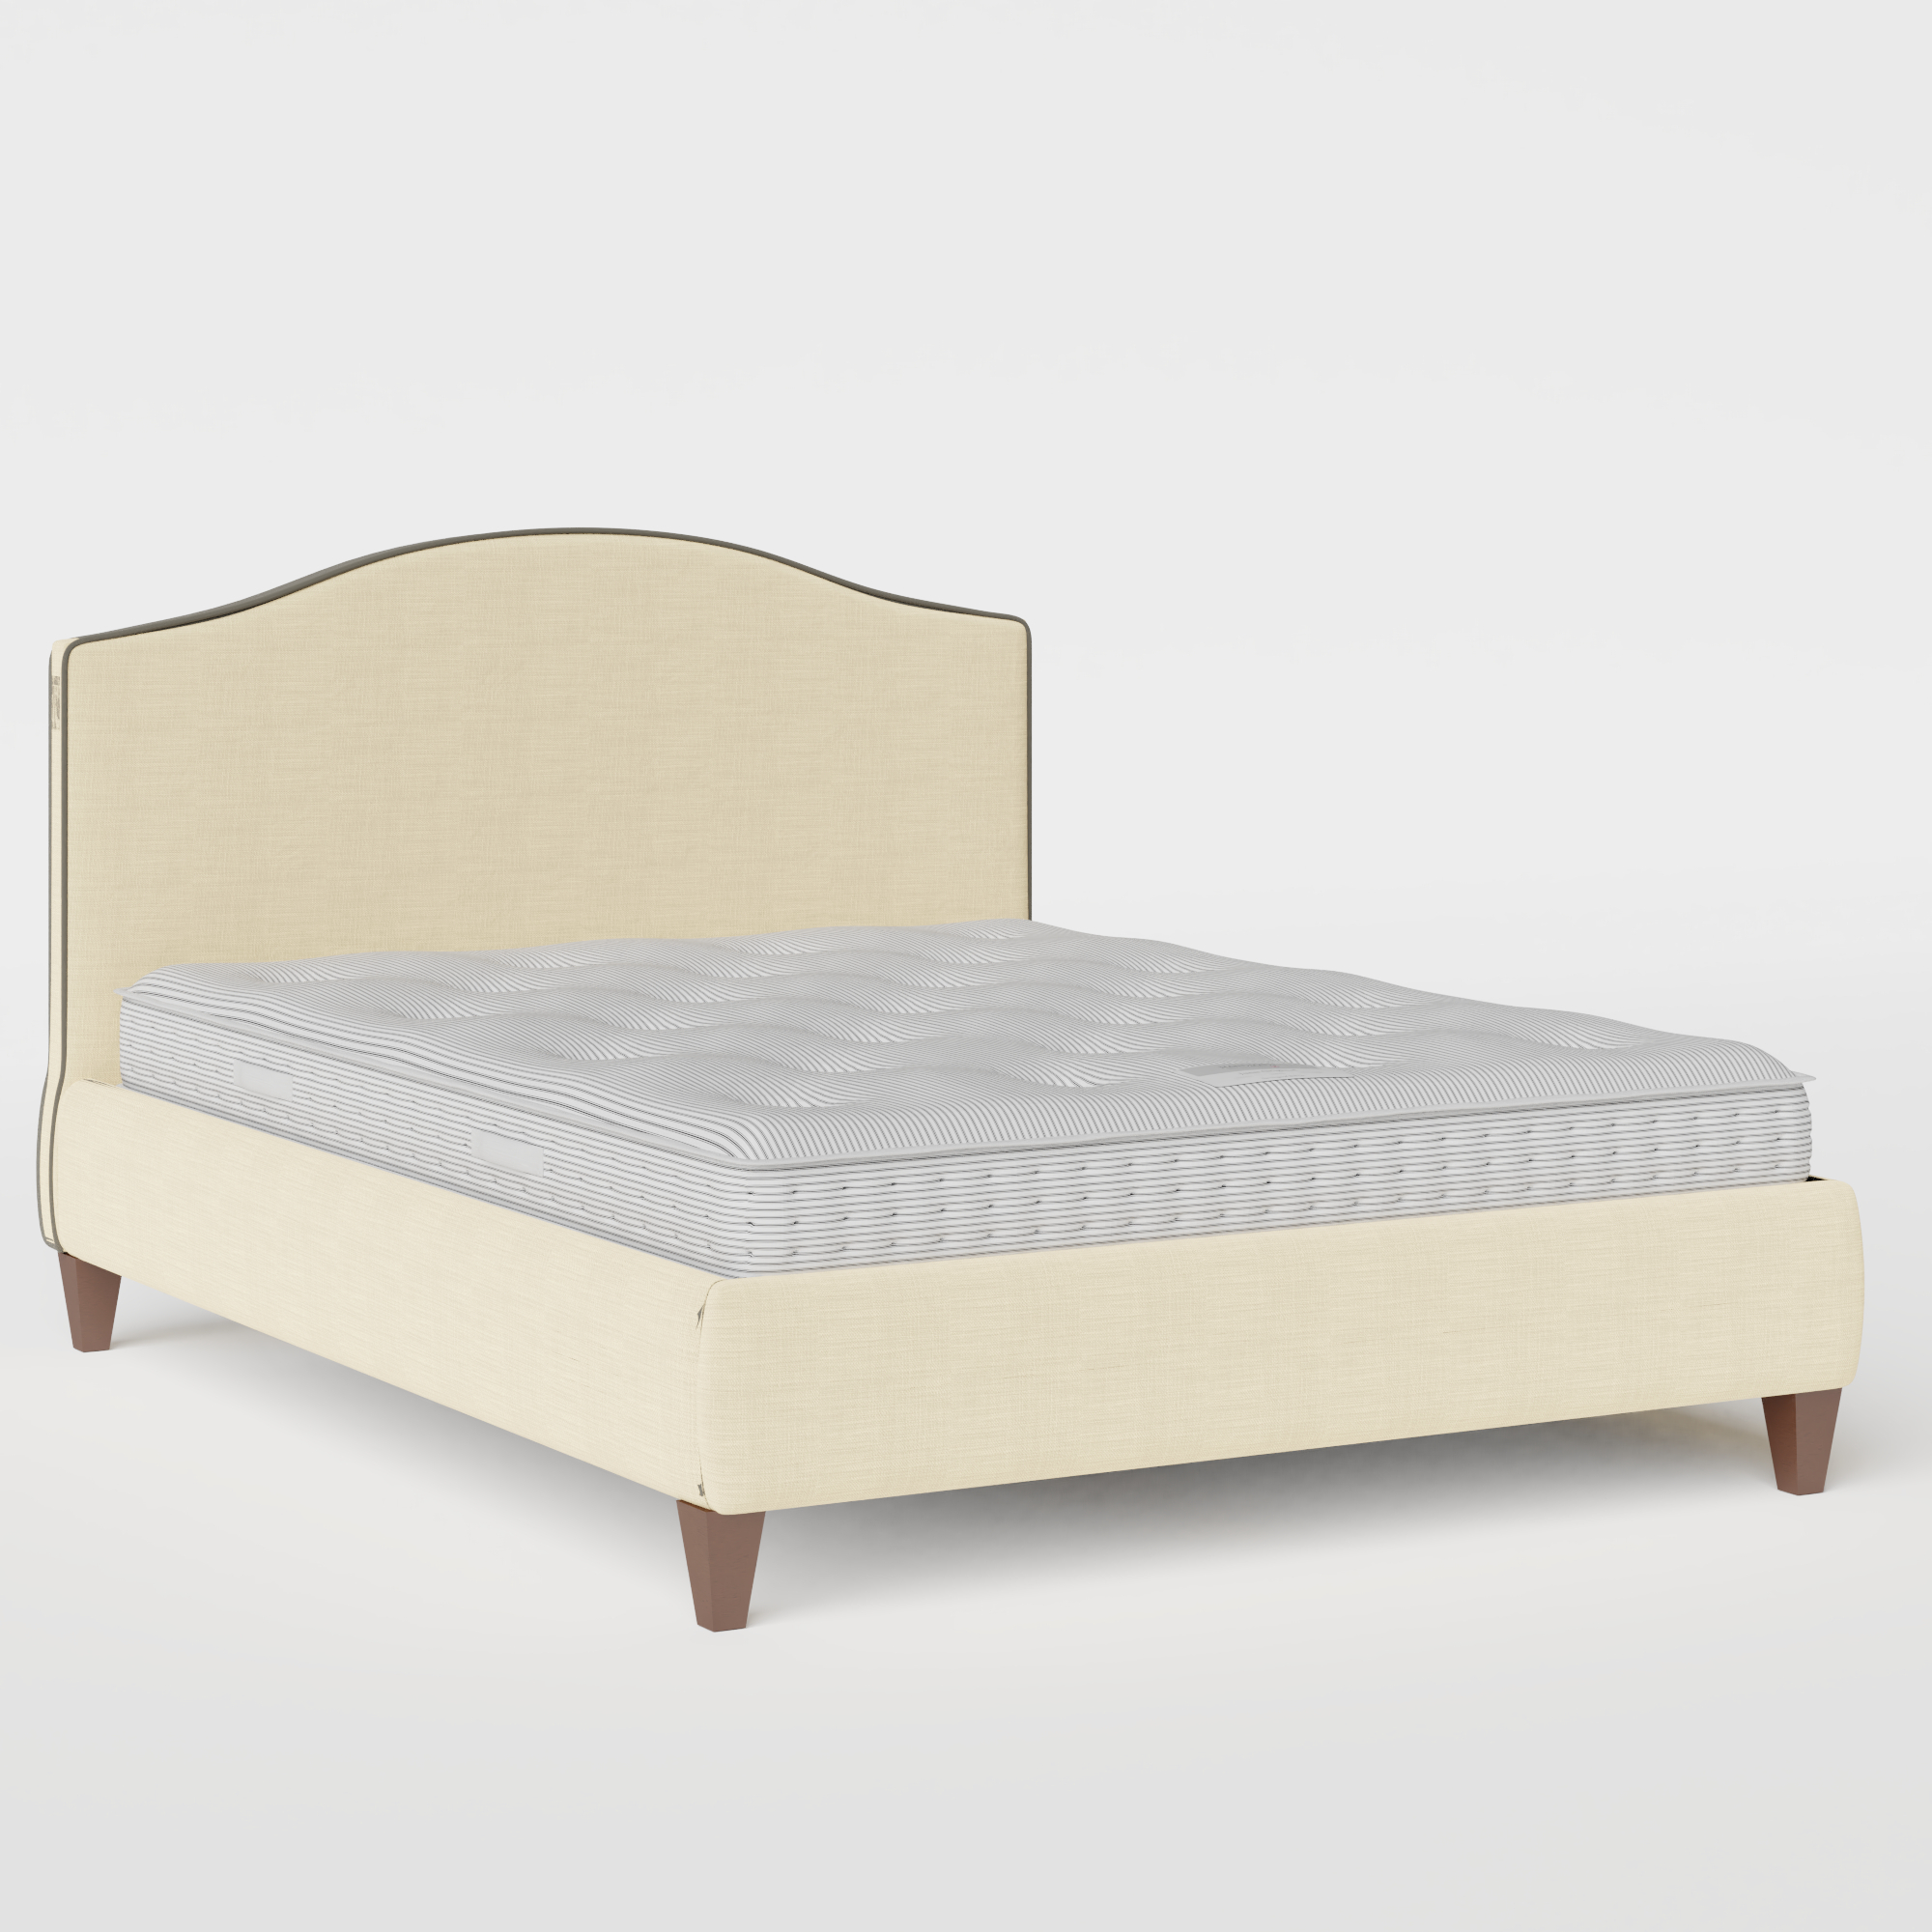 Daniella with Piping stoffen bed in natural